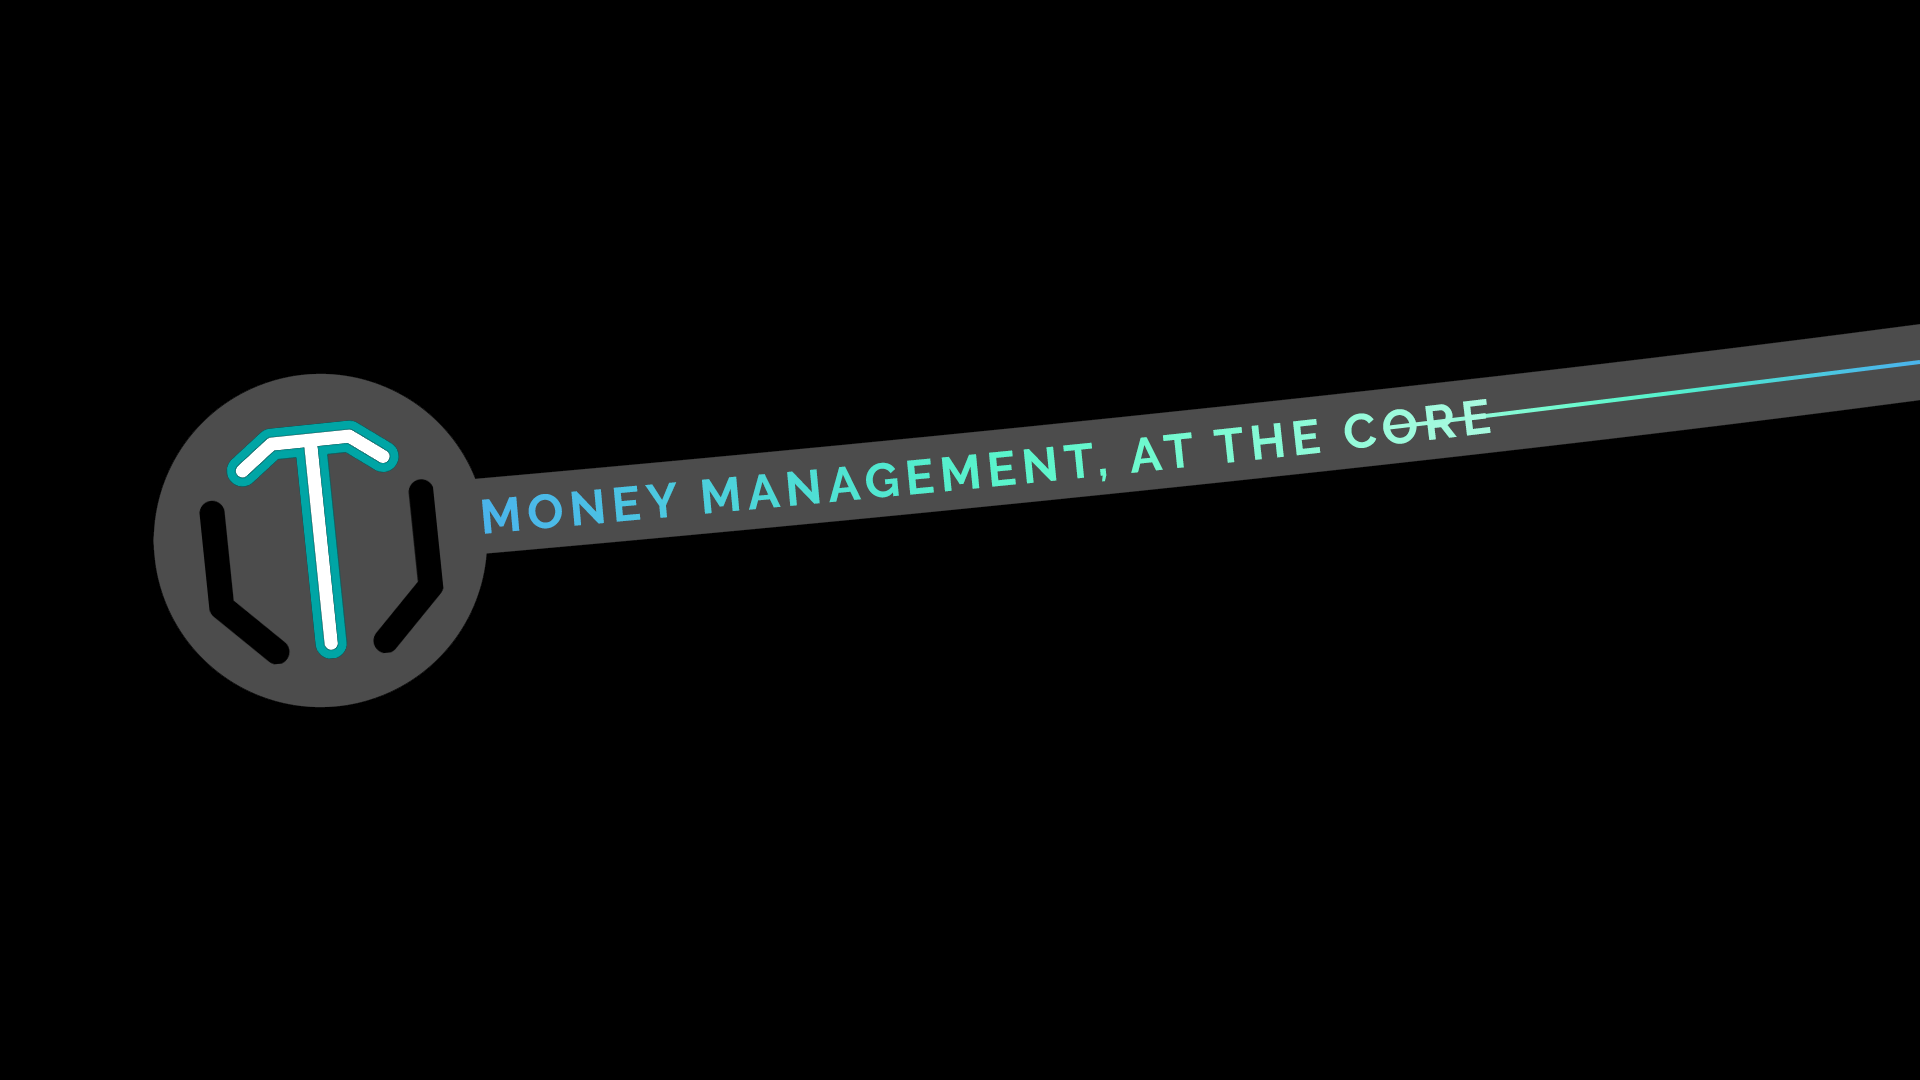 Money management, in the core